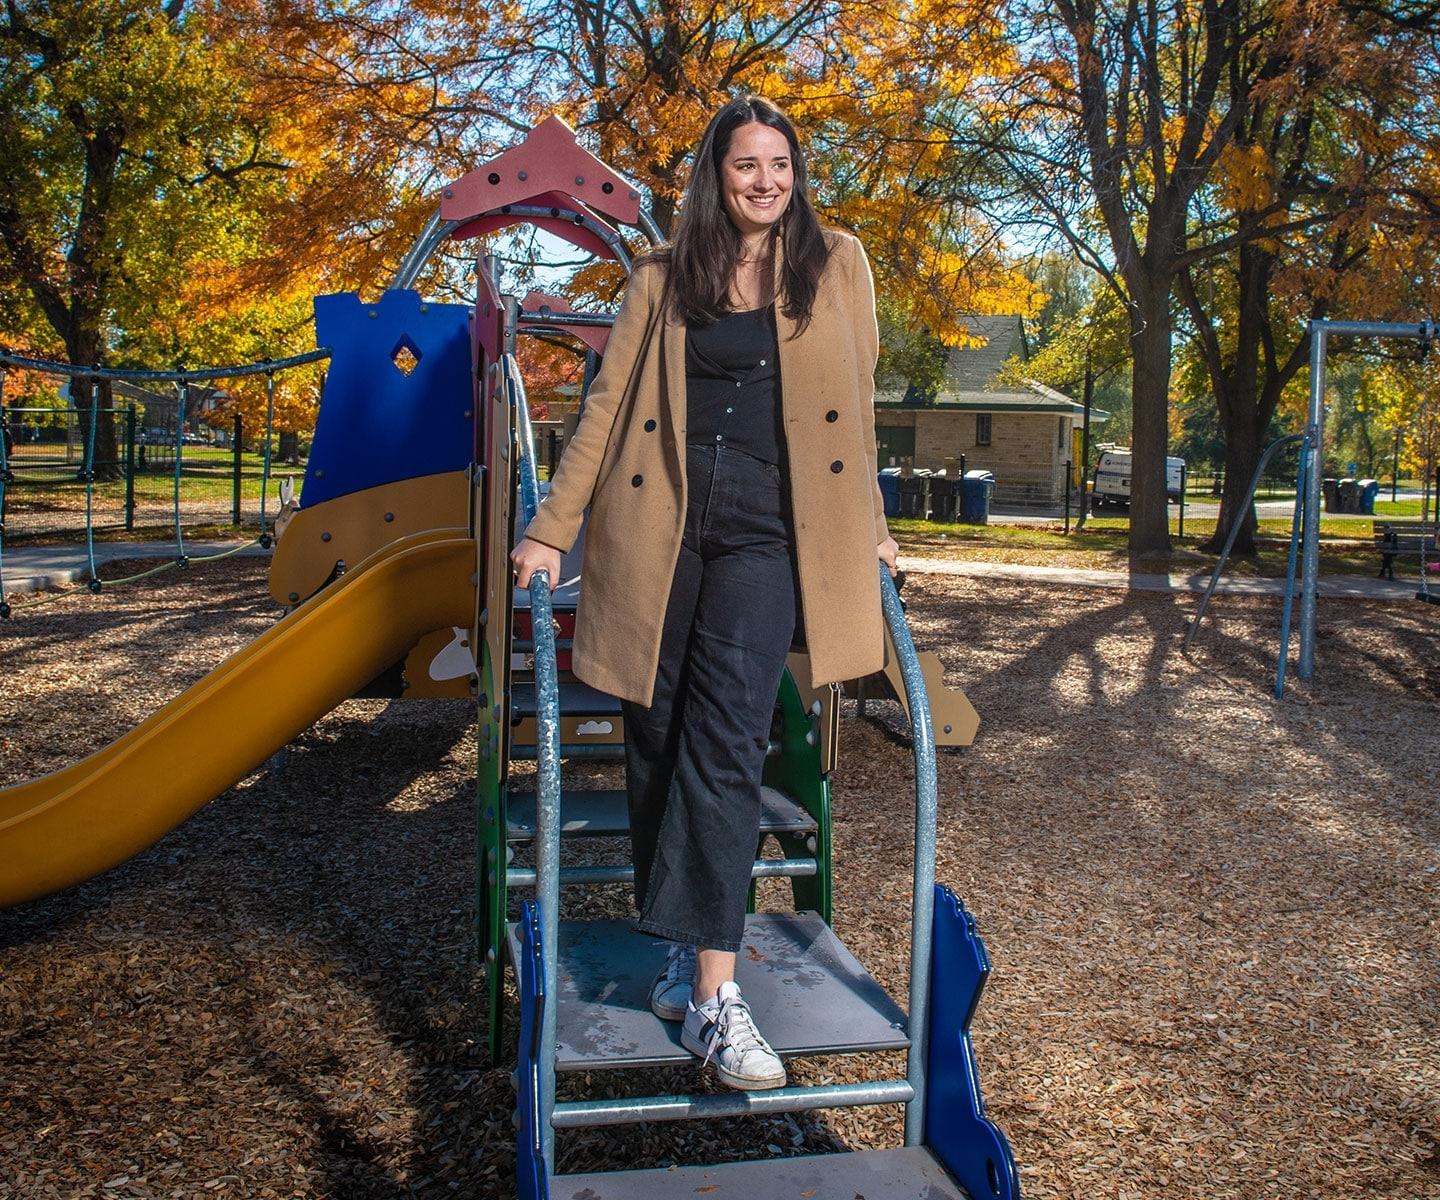 Living kidney donor on the steps of a playground structure